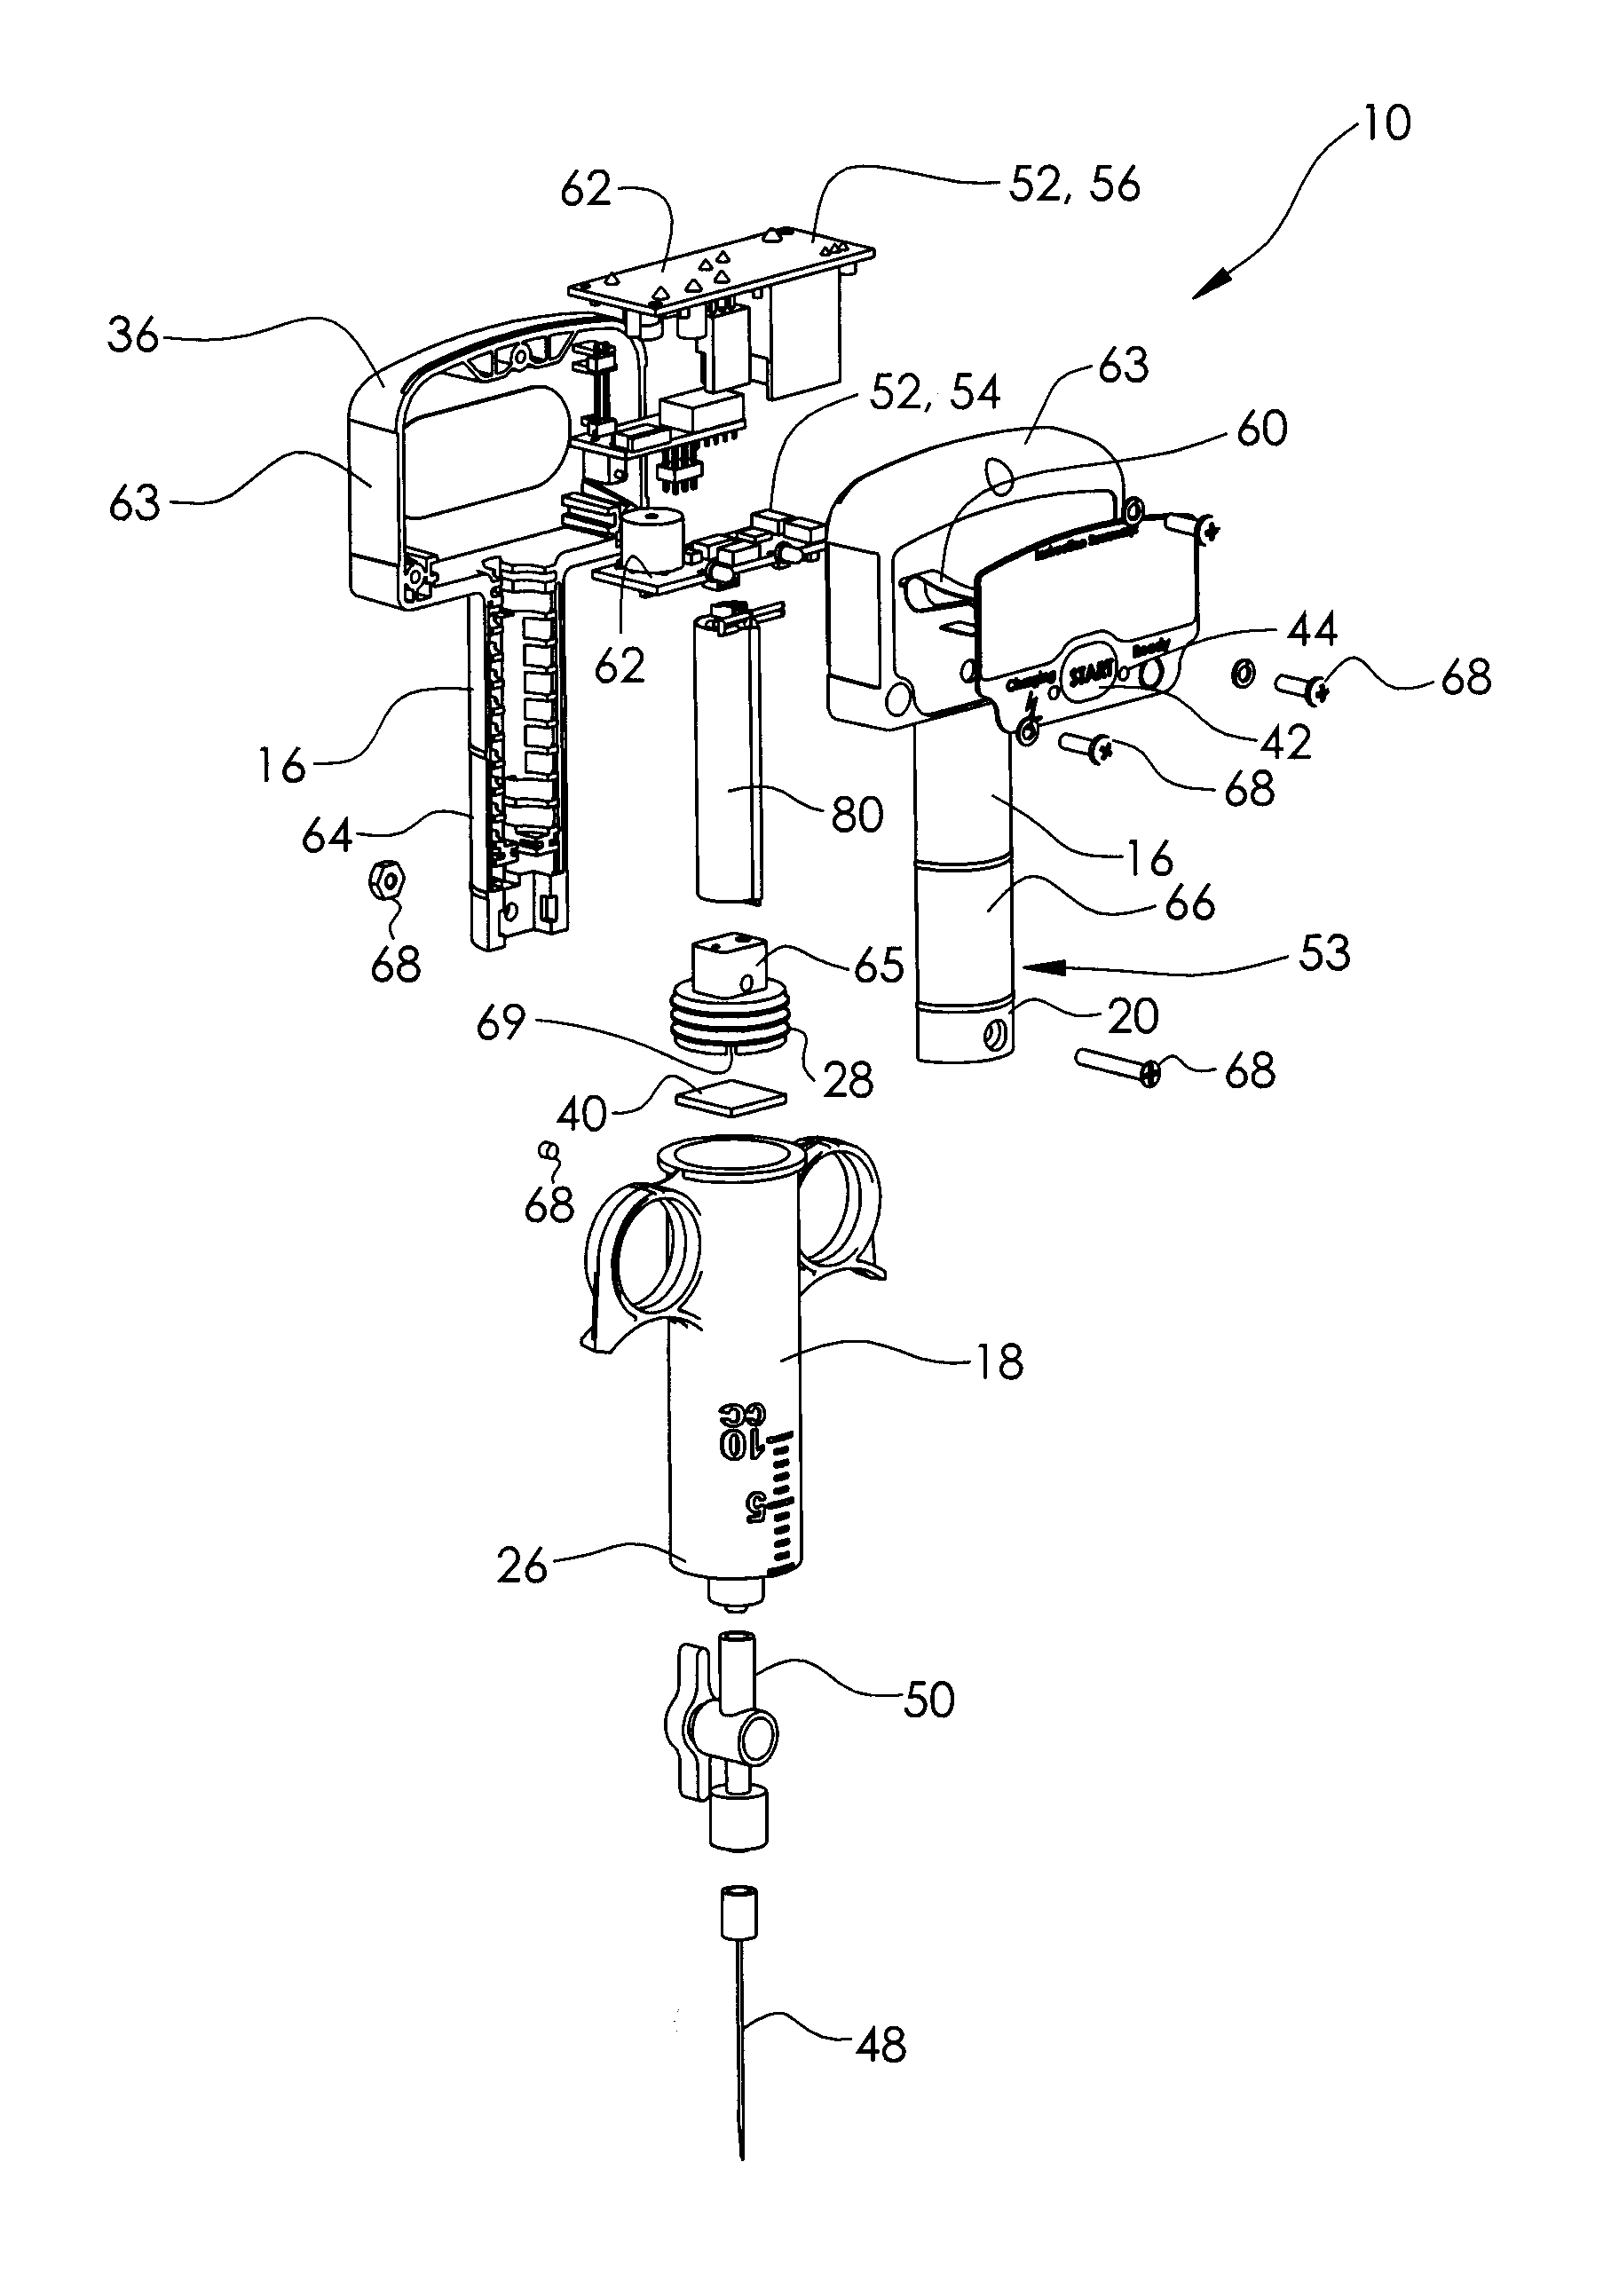 Apparatus and method for treating and dispensing a material into tissue